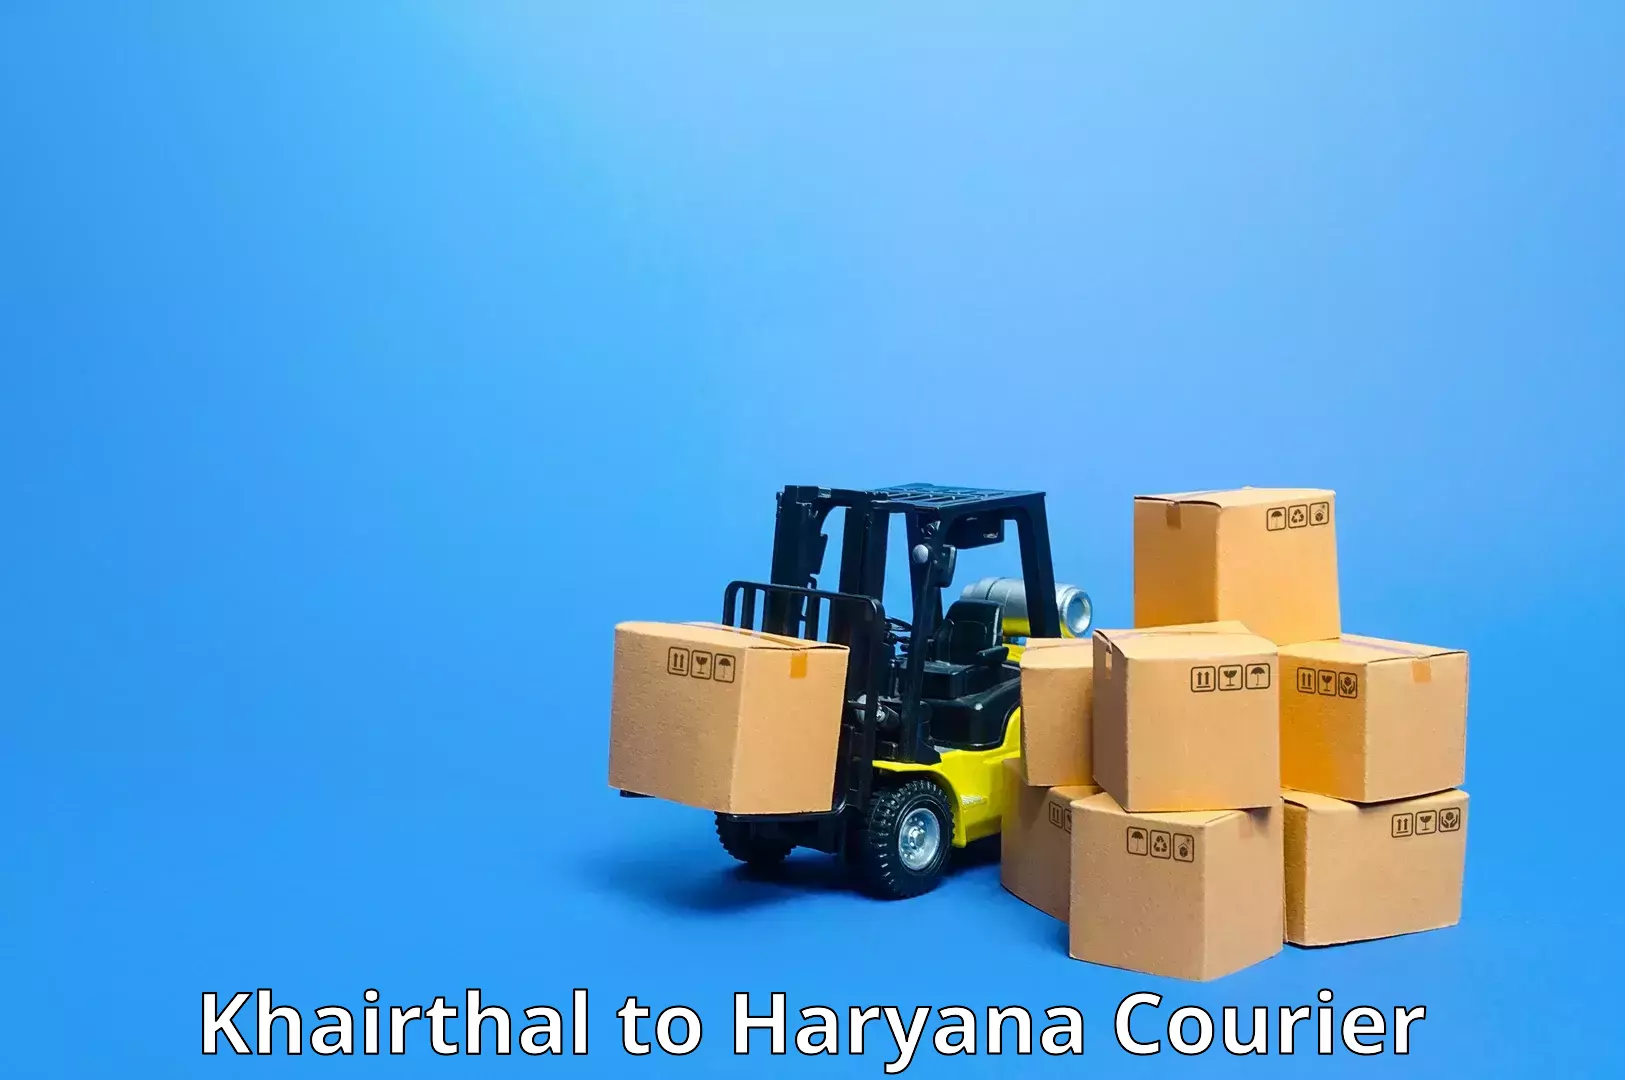 24-hour courier service Khairthal to Dharuhera